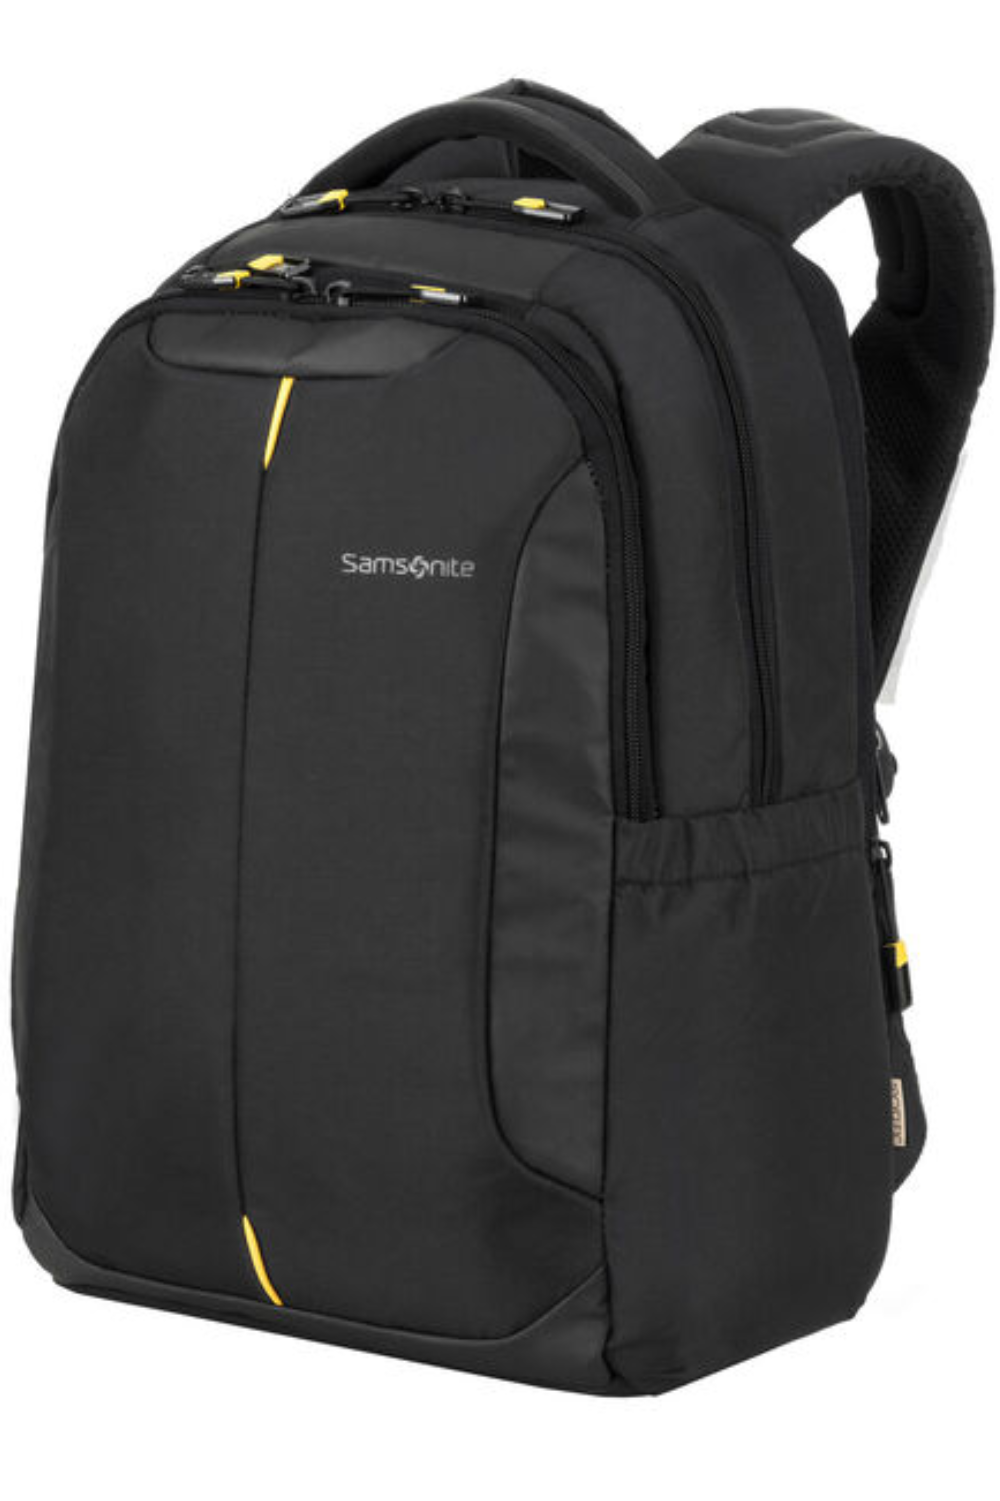 Samsonite Bags: Durable and Reliable Travel Companions